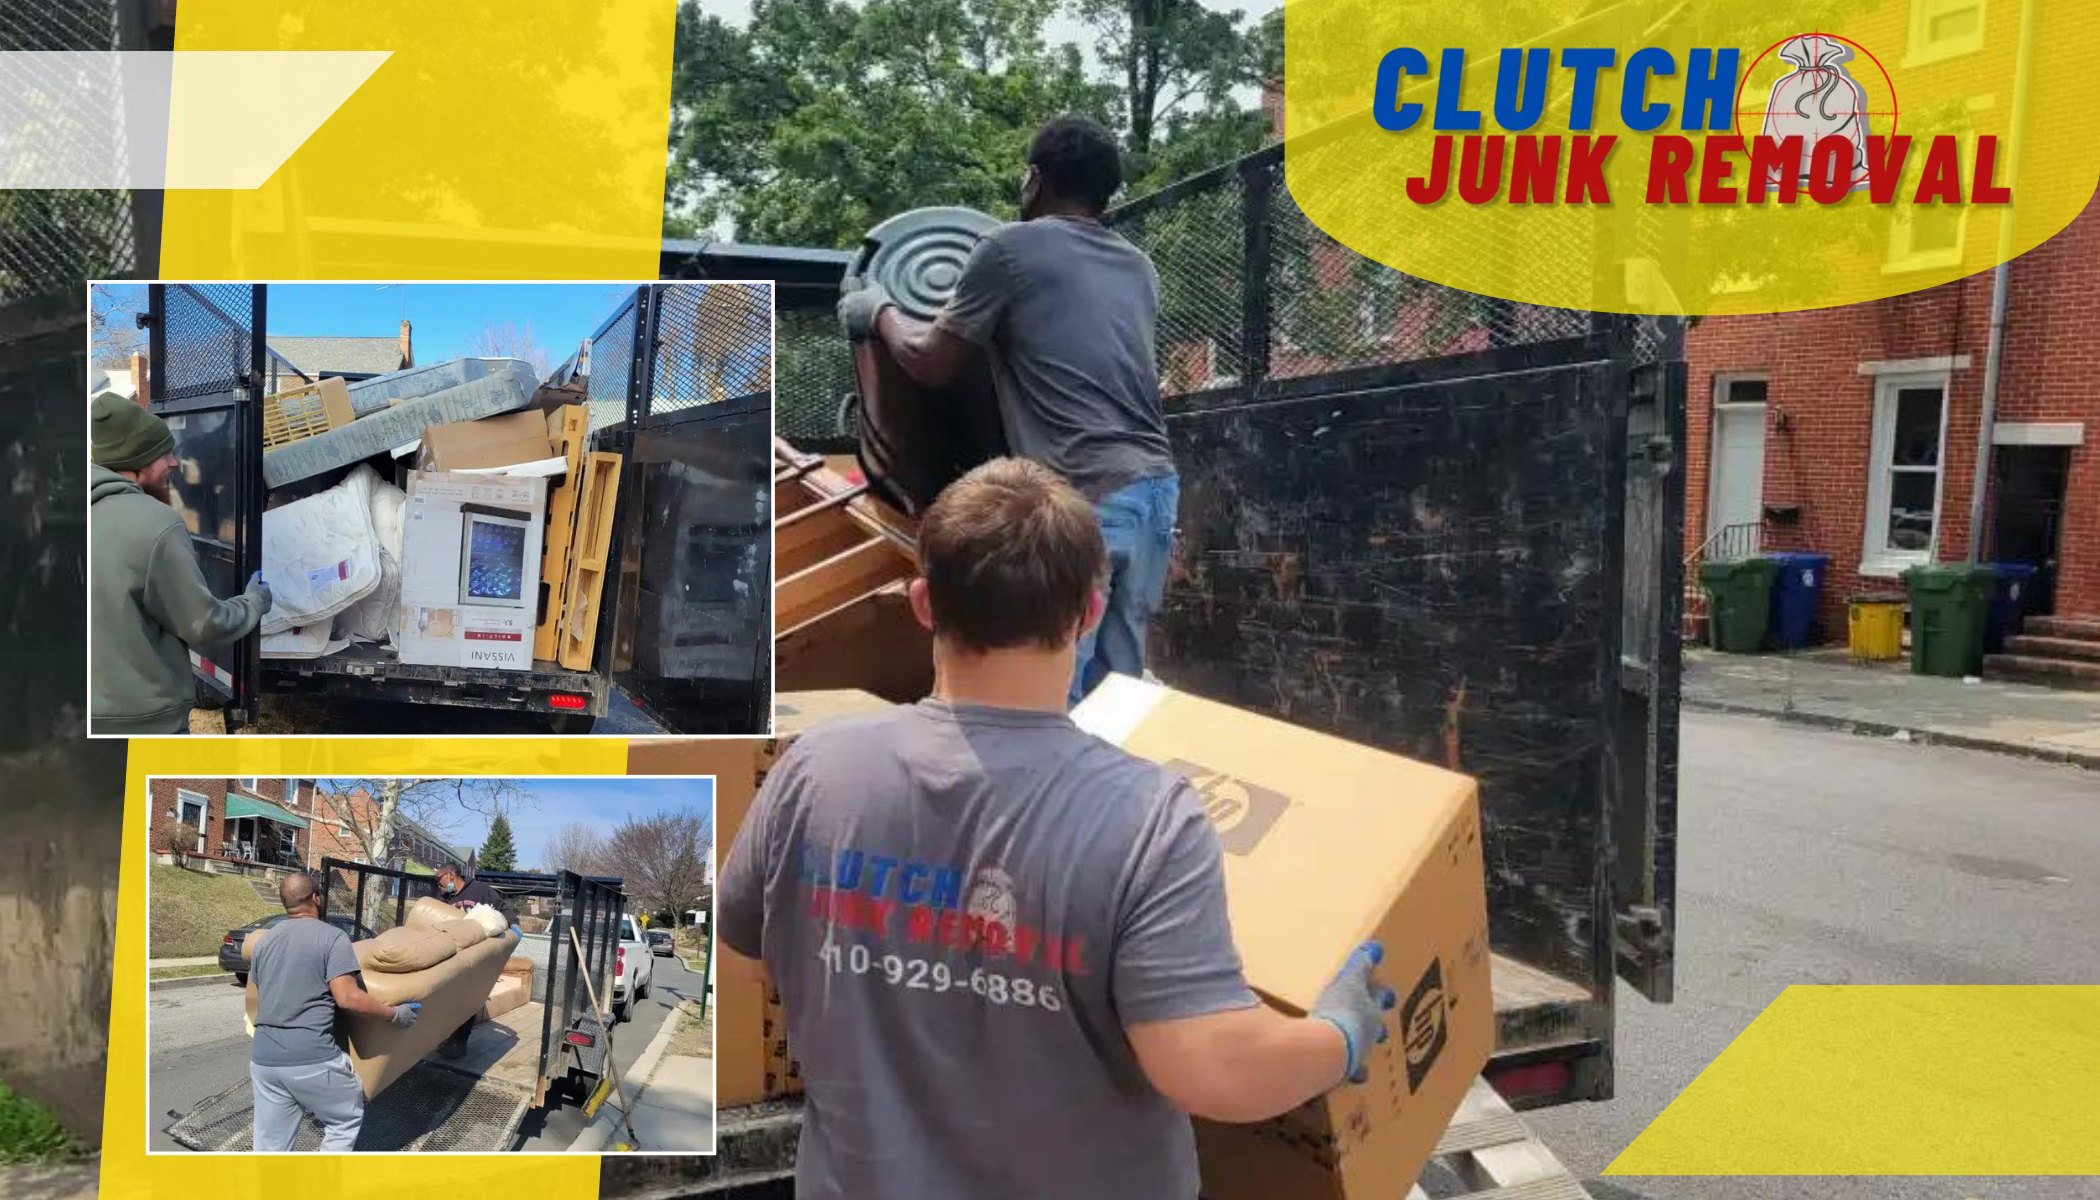 Clutch Junk Removal Cover Image